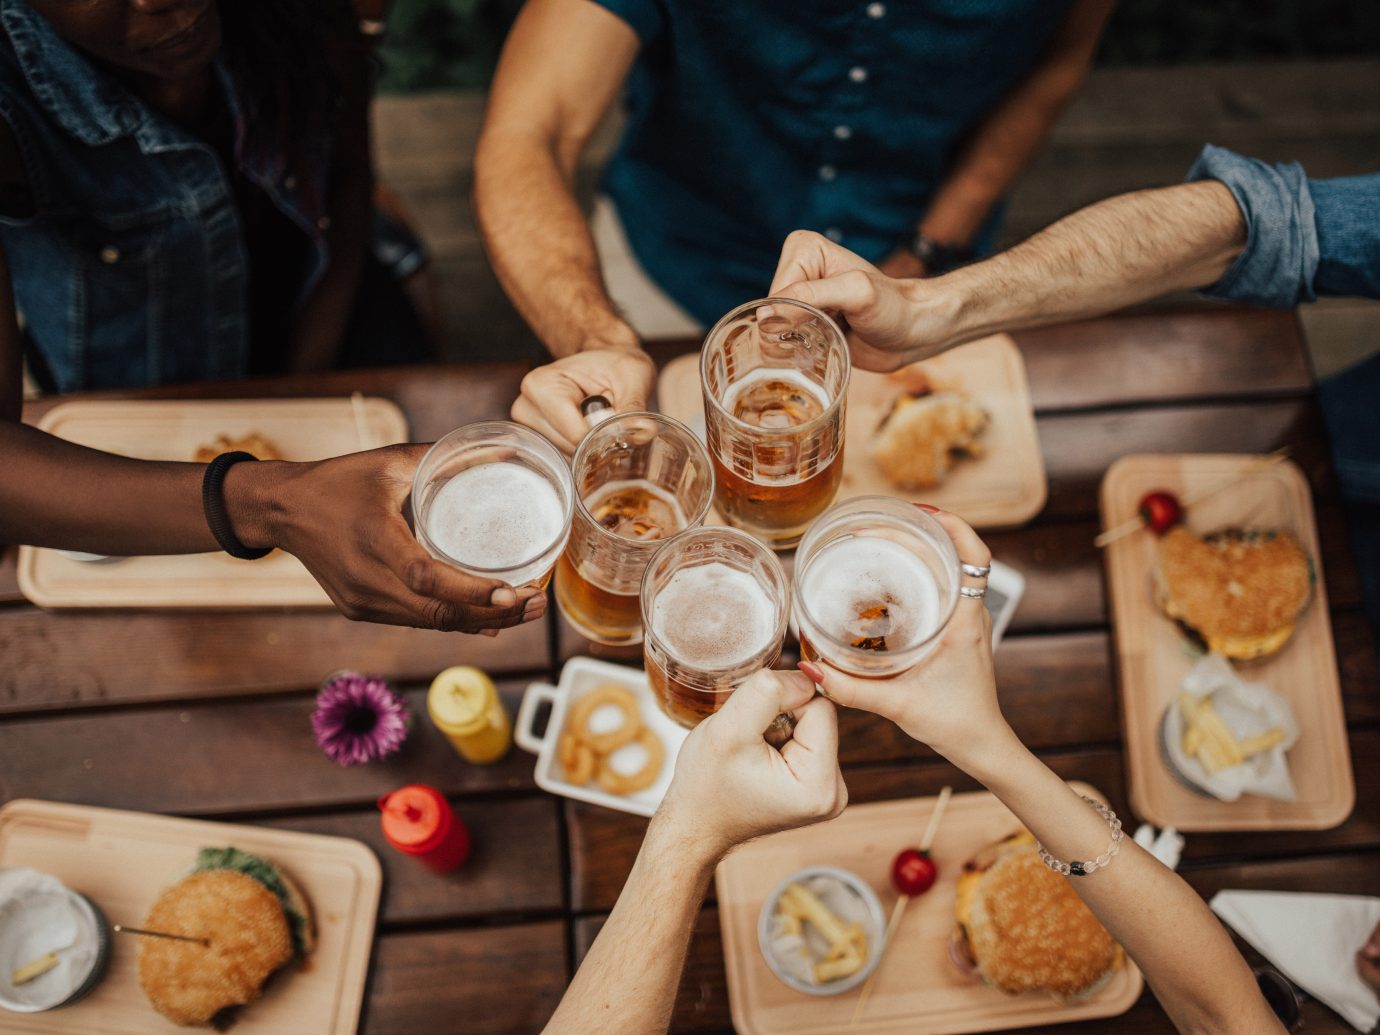 Group of friends toasting their beers with burgers on the table